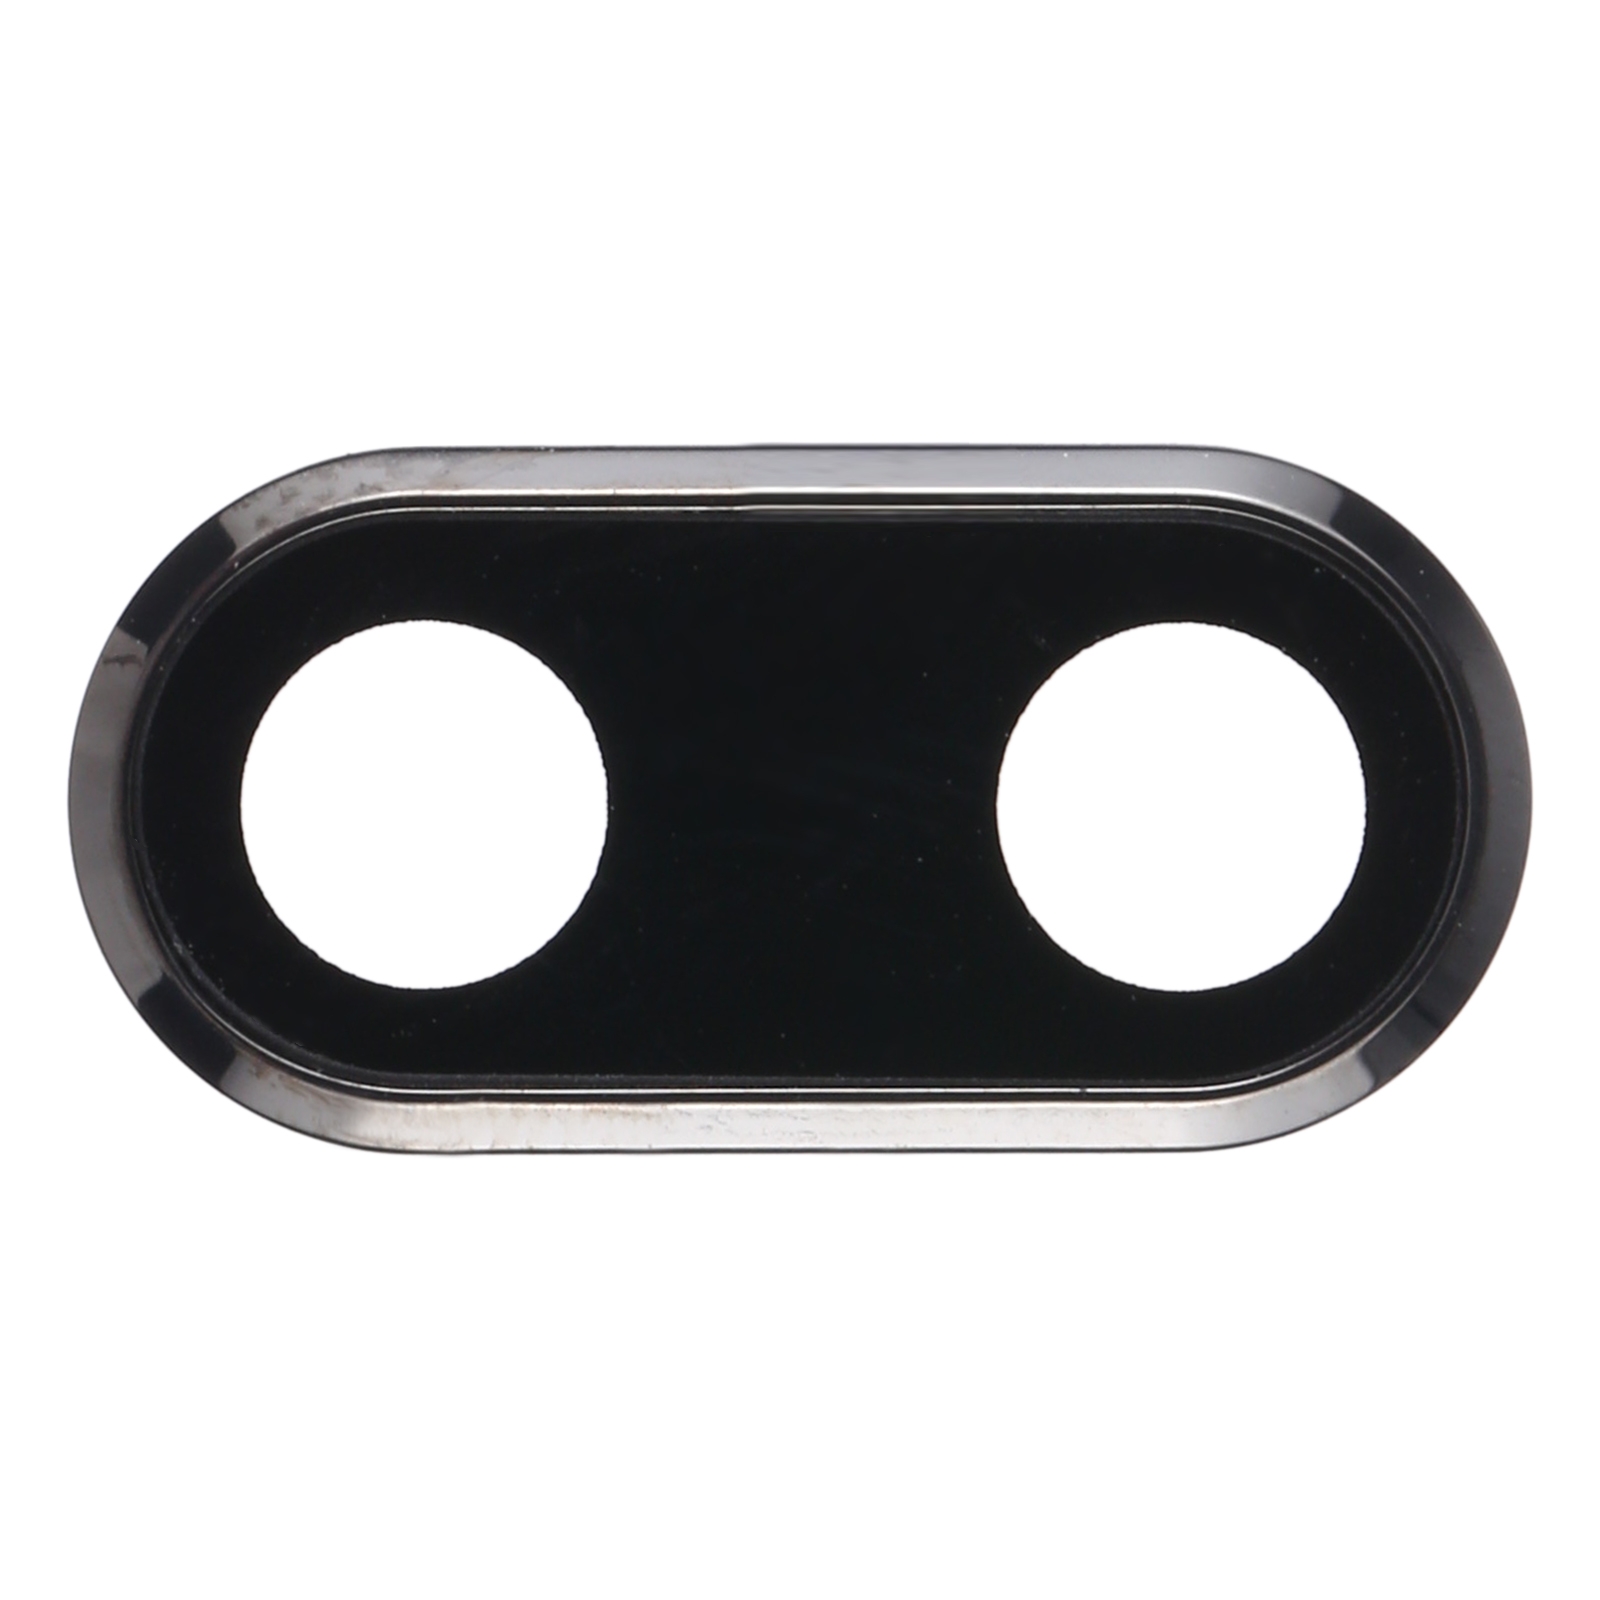 

Camera Lens Cover for OnePlus 5T 5